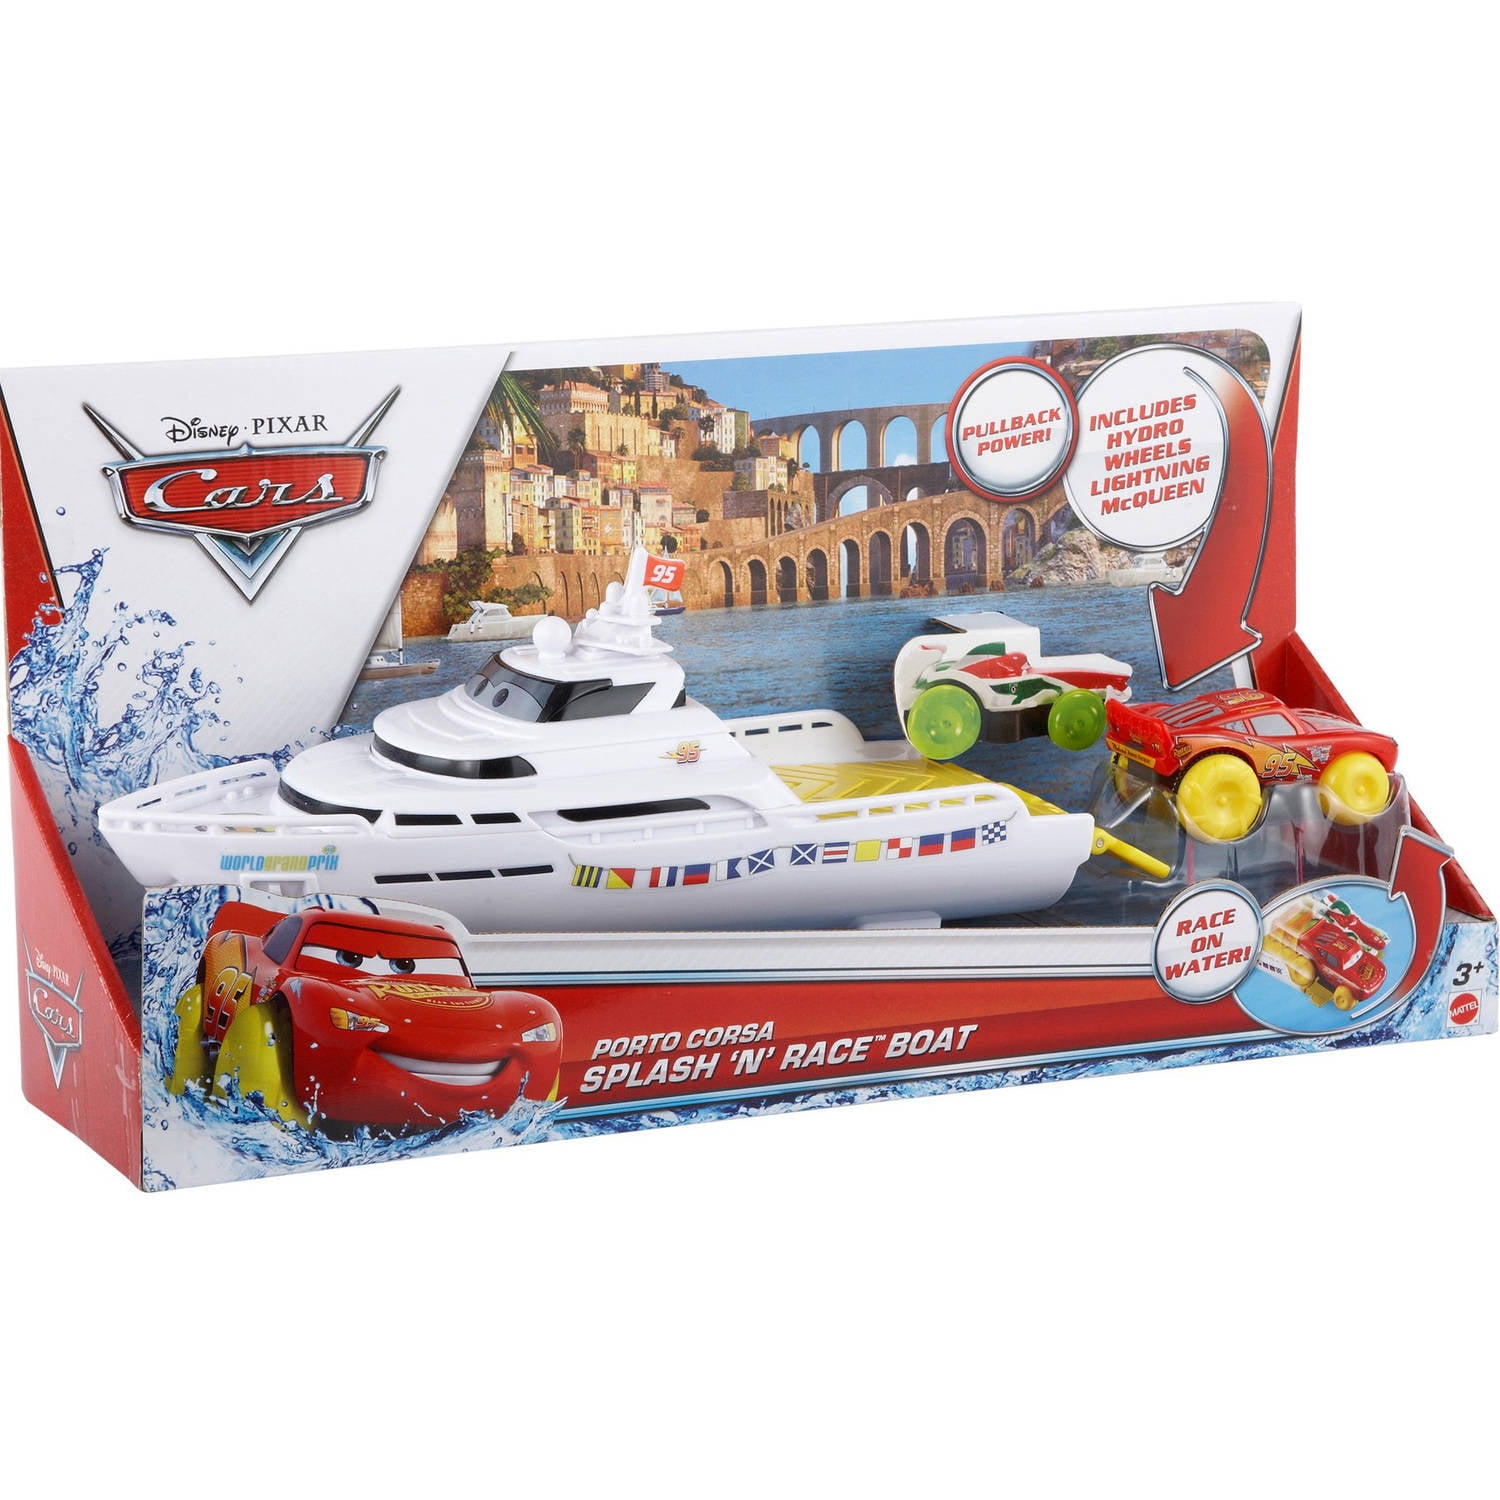 cars 2 ship toy